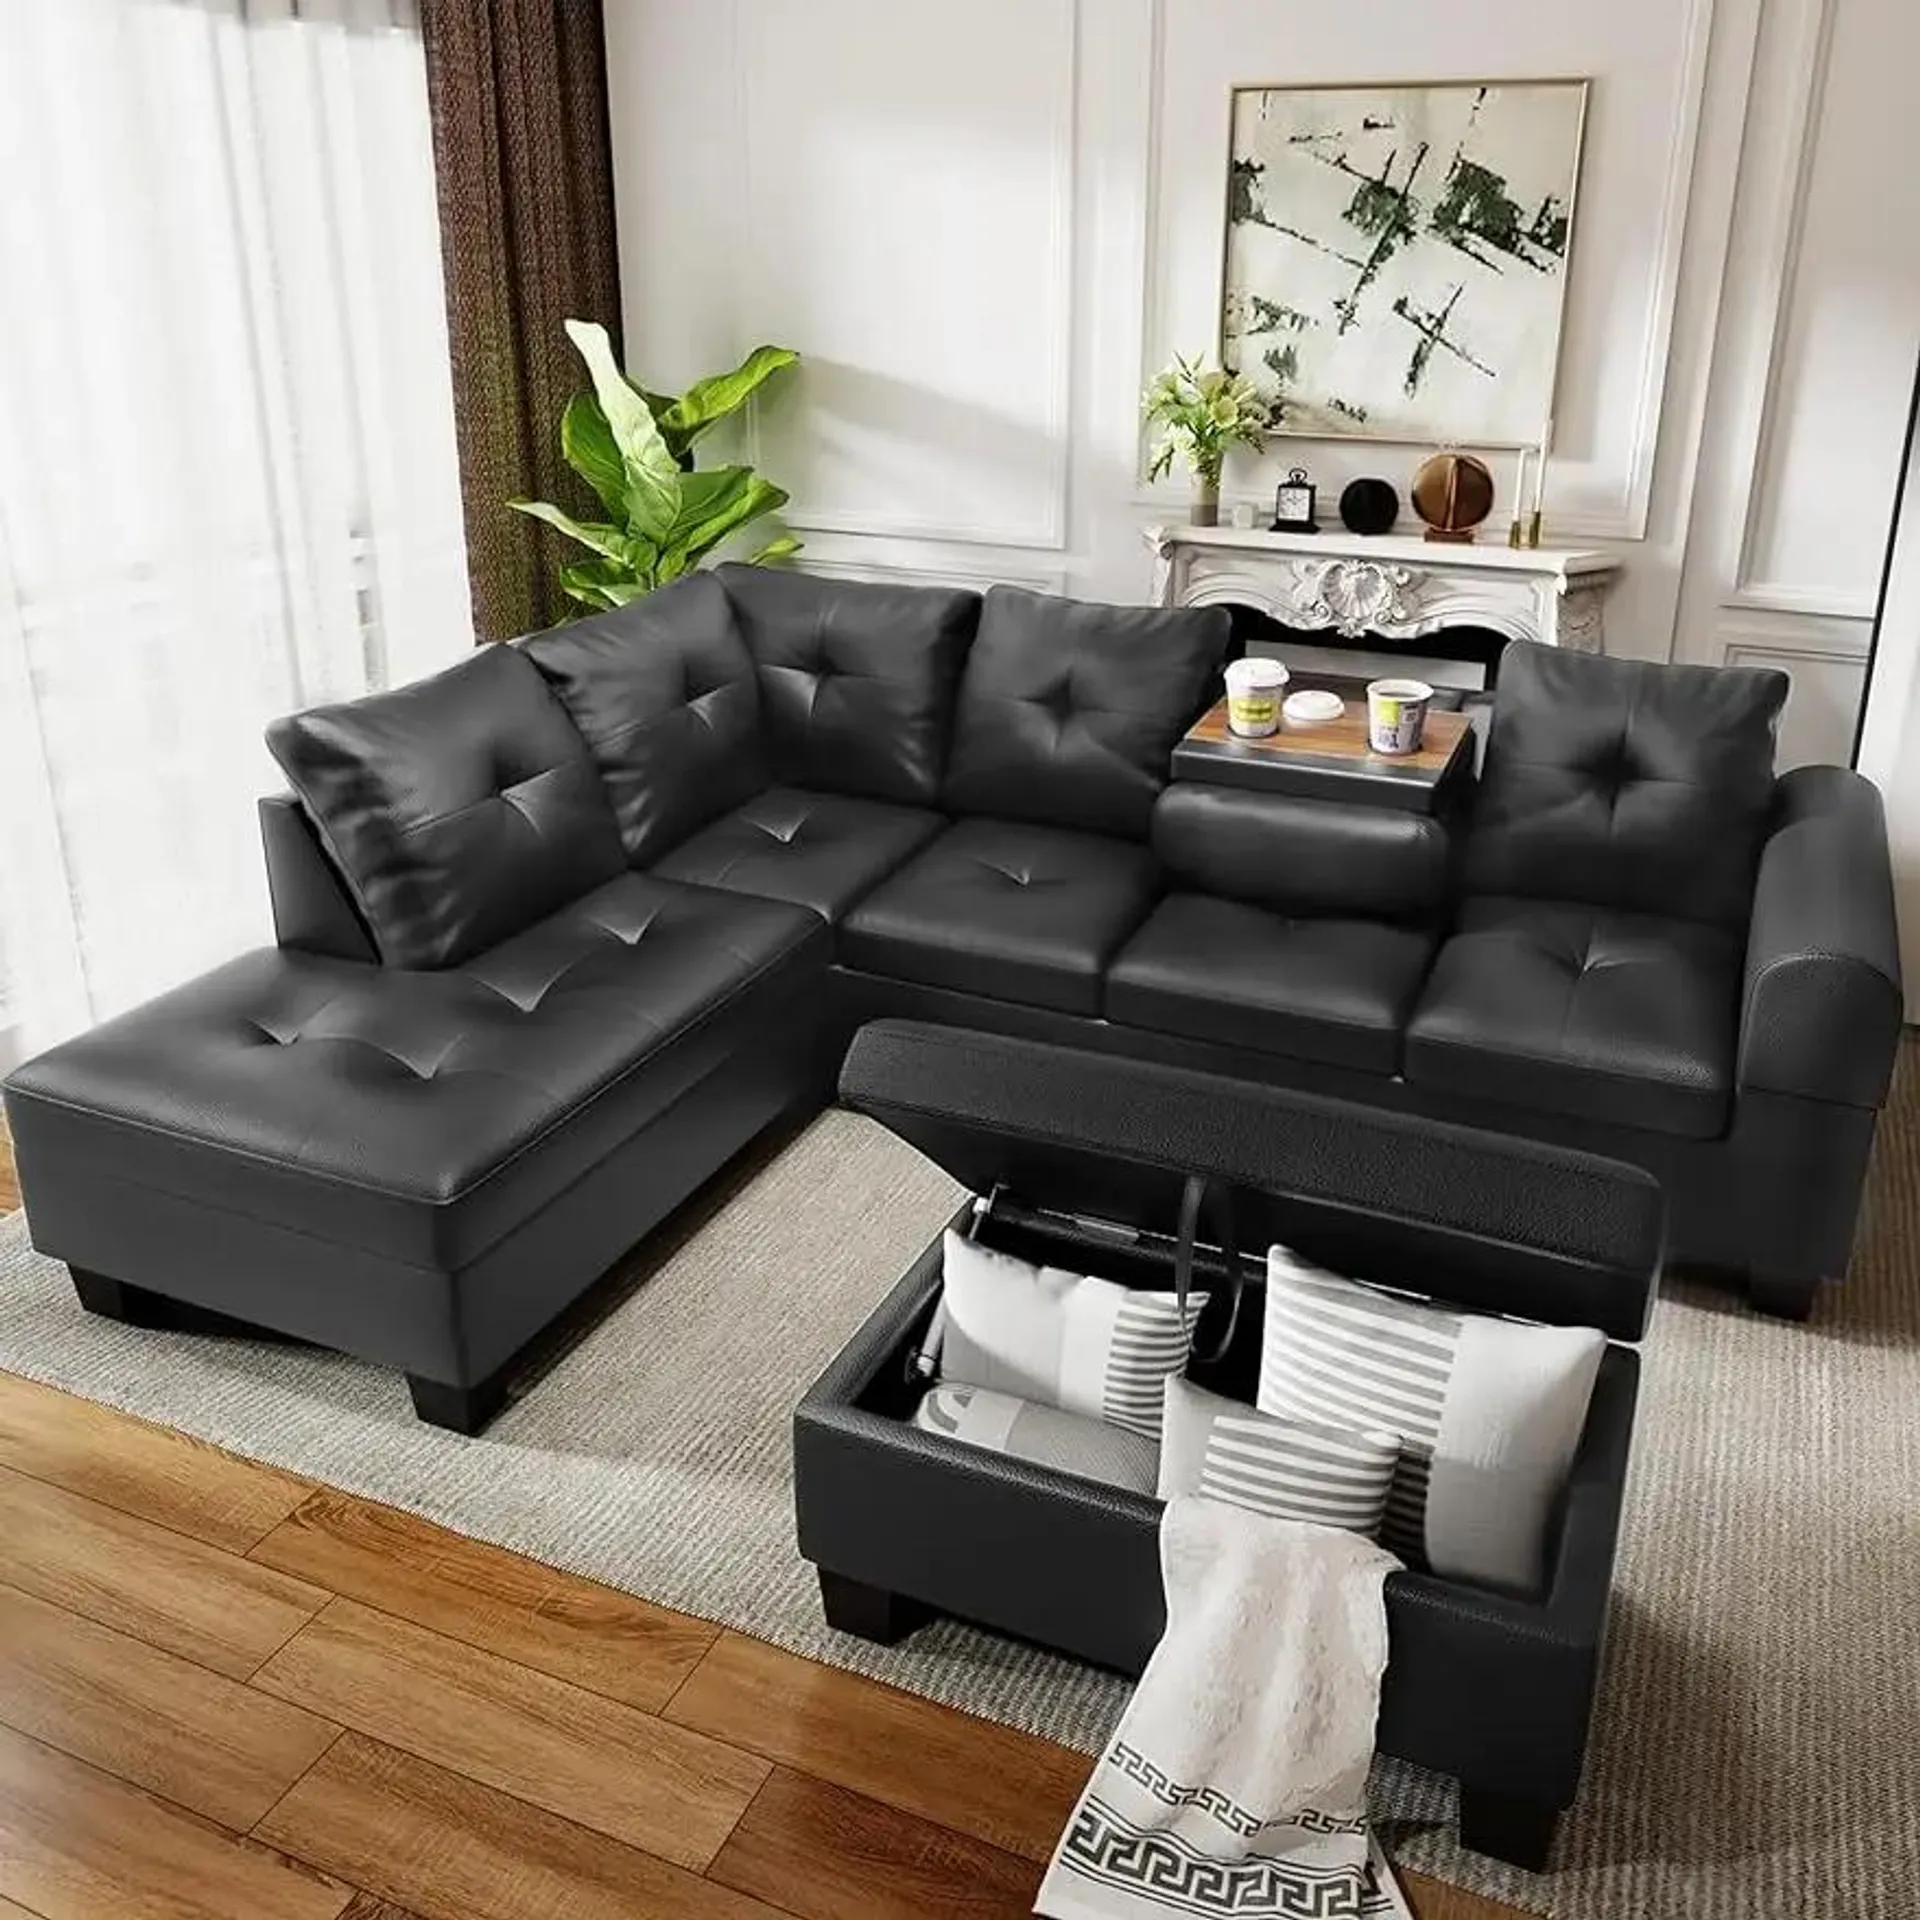 Faux Leather/Linen Fabric Sectional Sofa Couch, Modern L-Shaped Modular Couch Upholstered 3/6 Seaters Living Room Sofa Couch